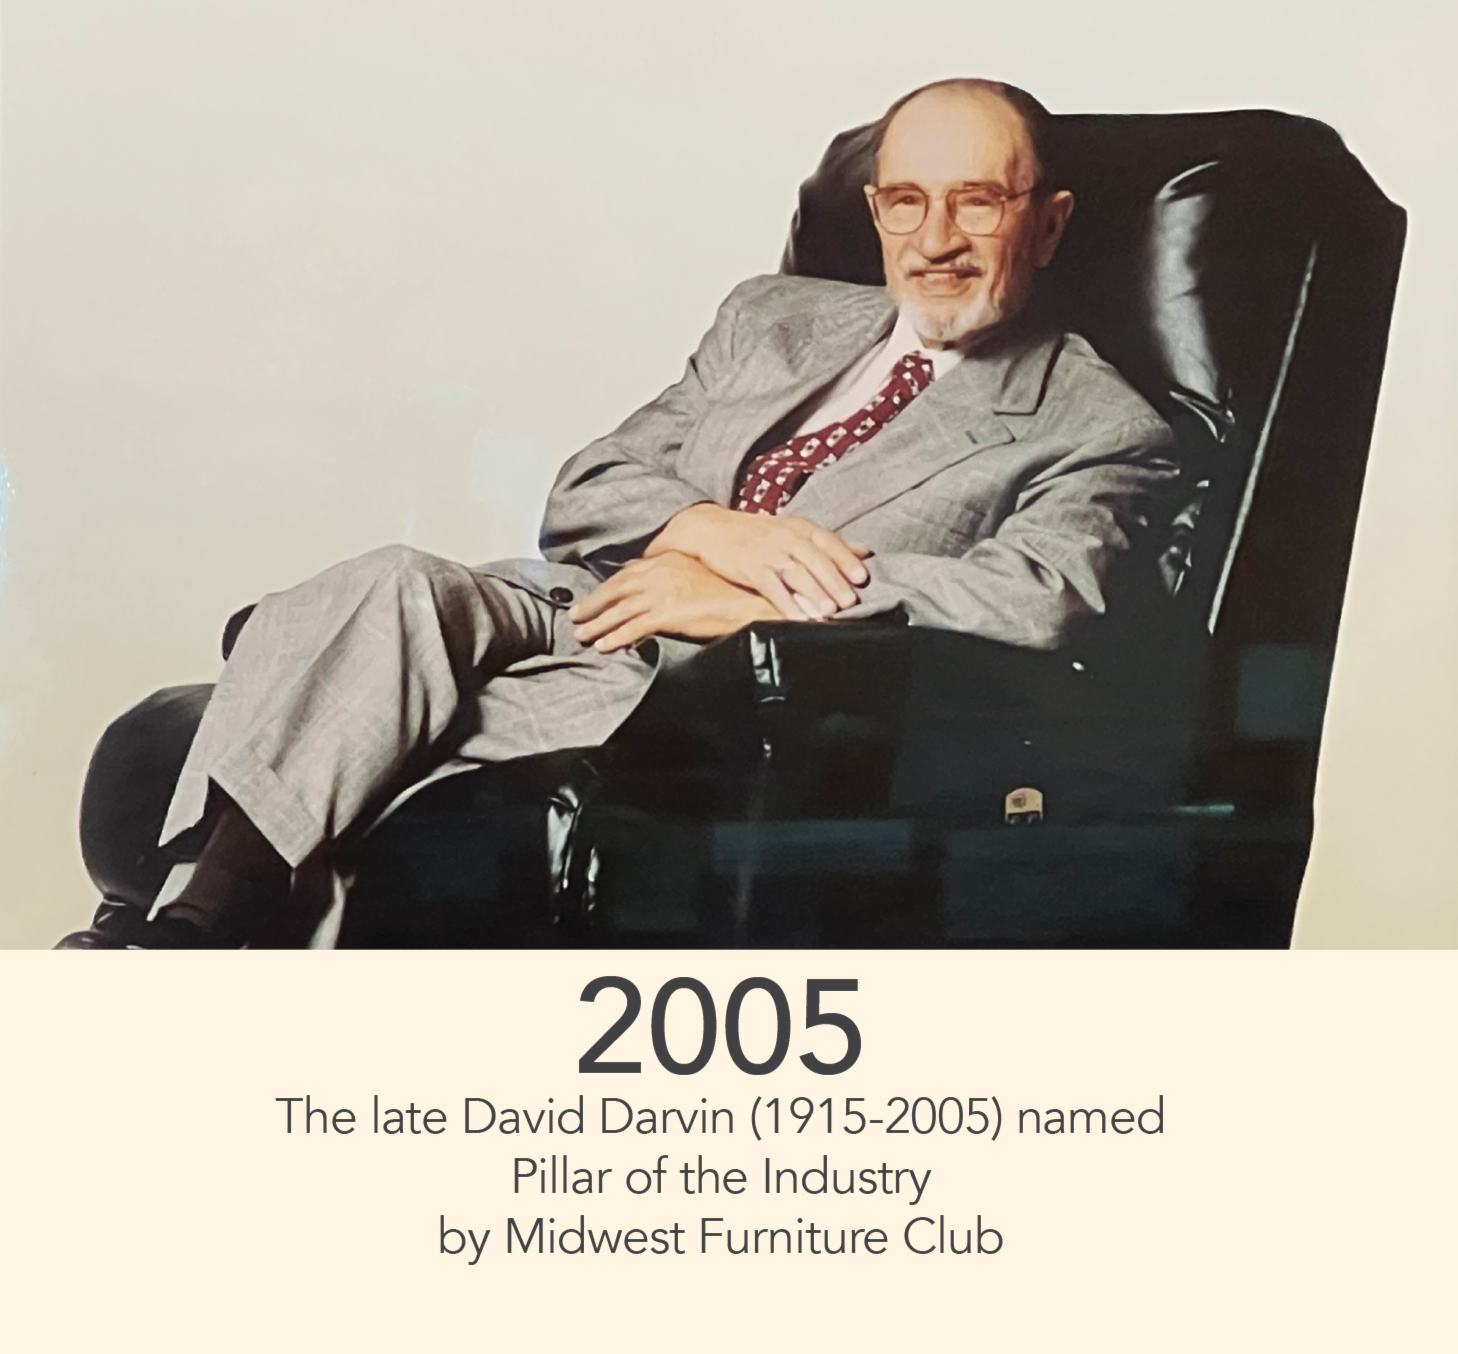 2005 - The late David Darvin (1915-2005) named 
Pillar of the Industry 
by Midwest Furniture Club